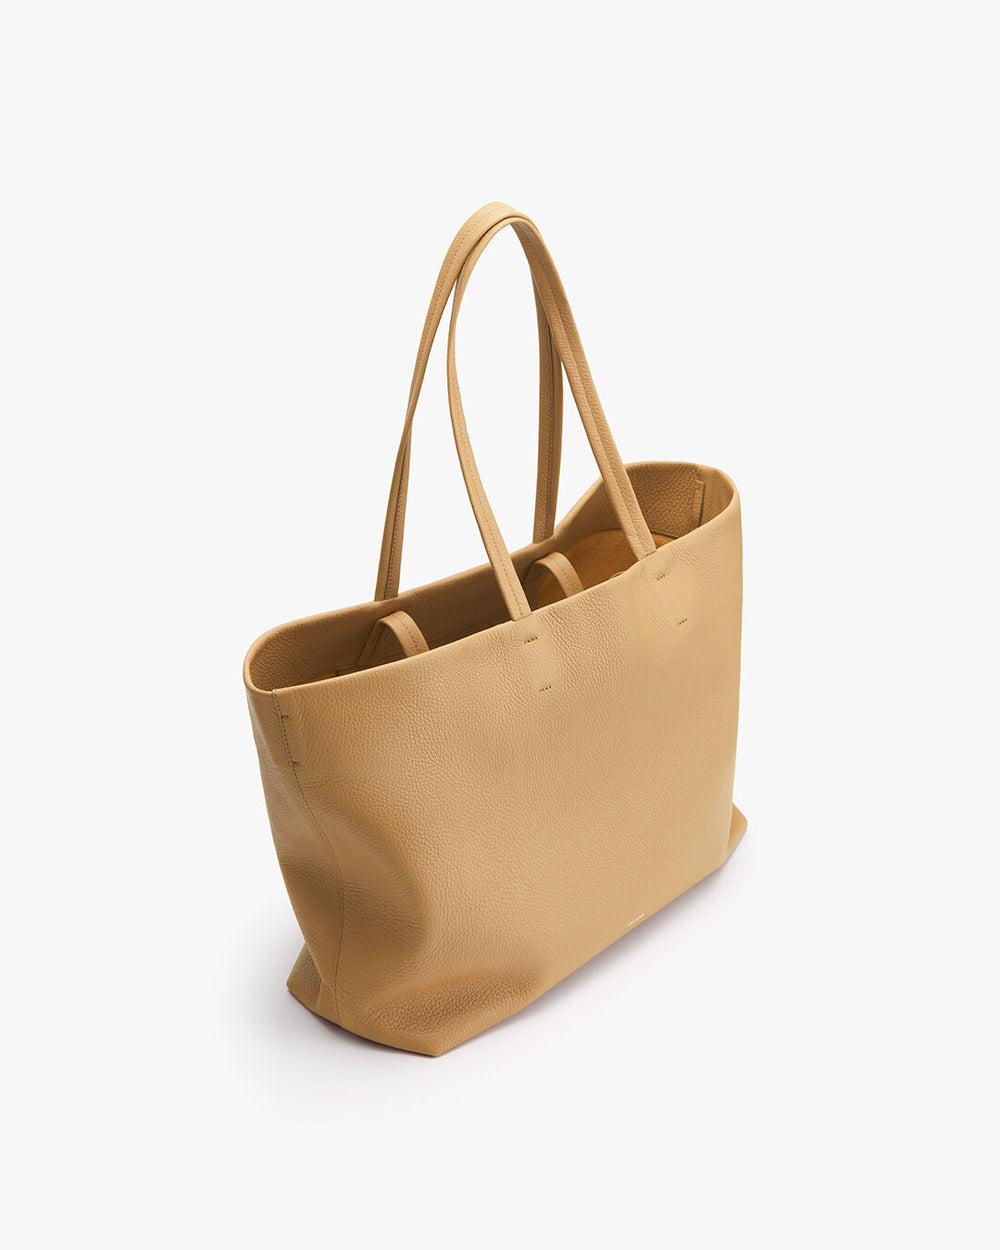 Tote bag with two handles standing upright against a plain background.